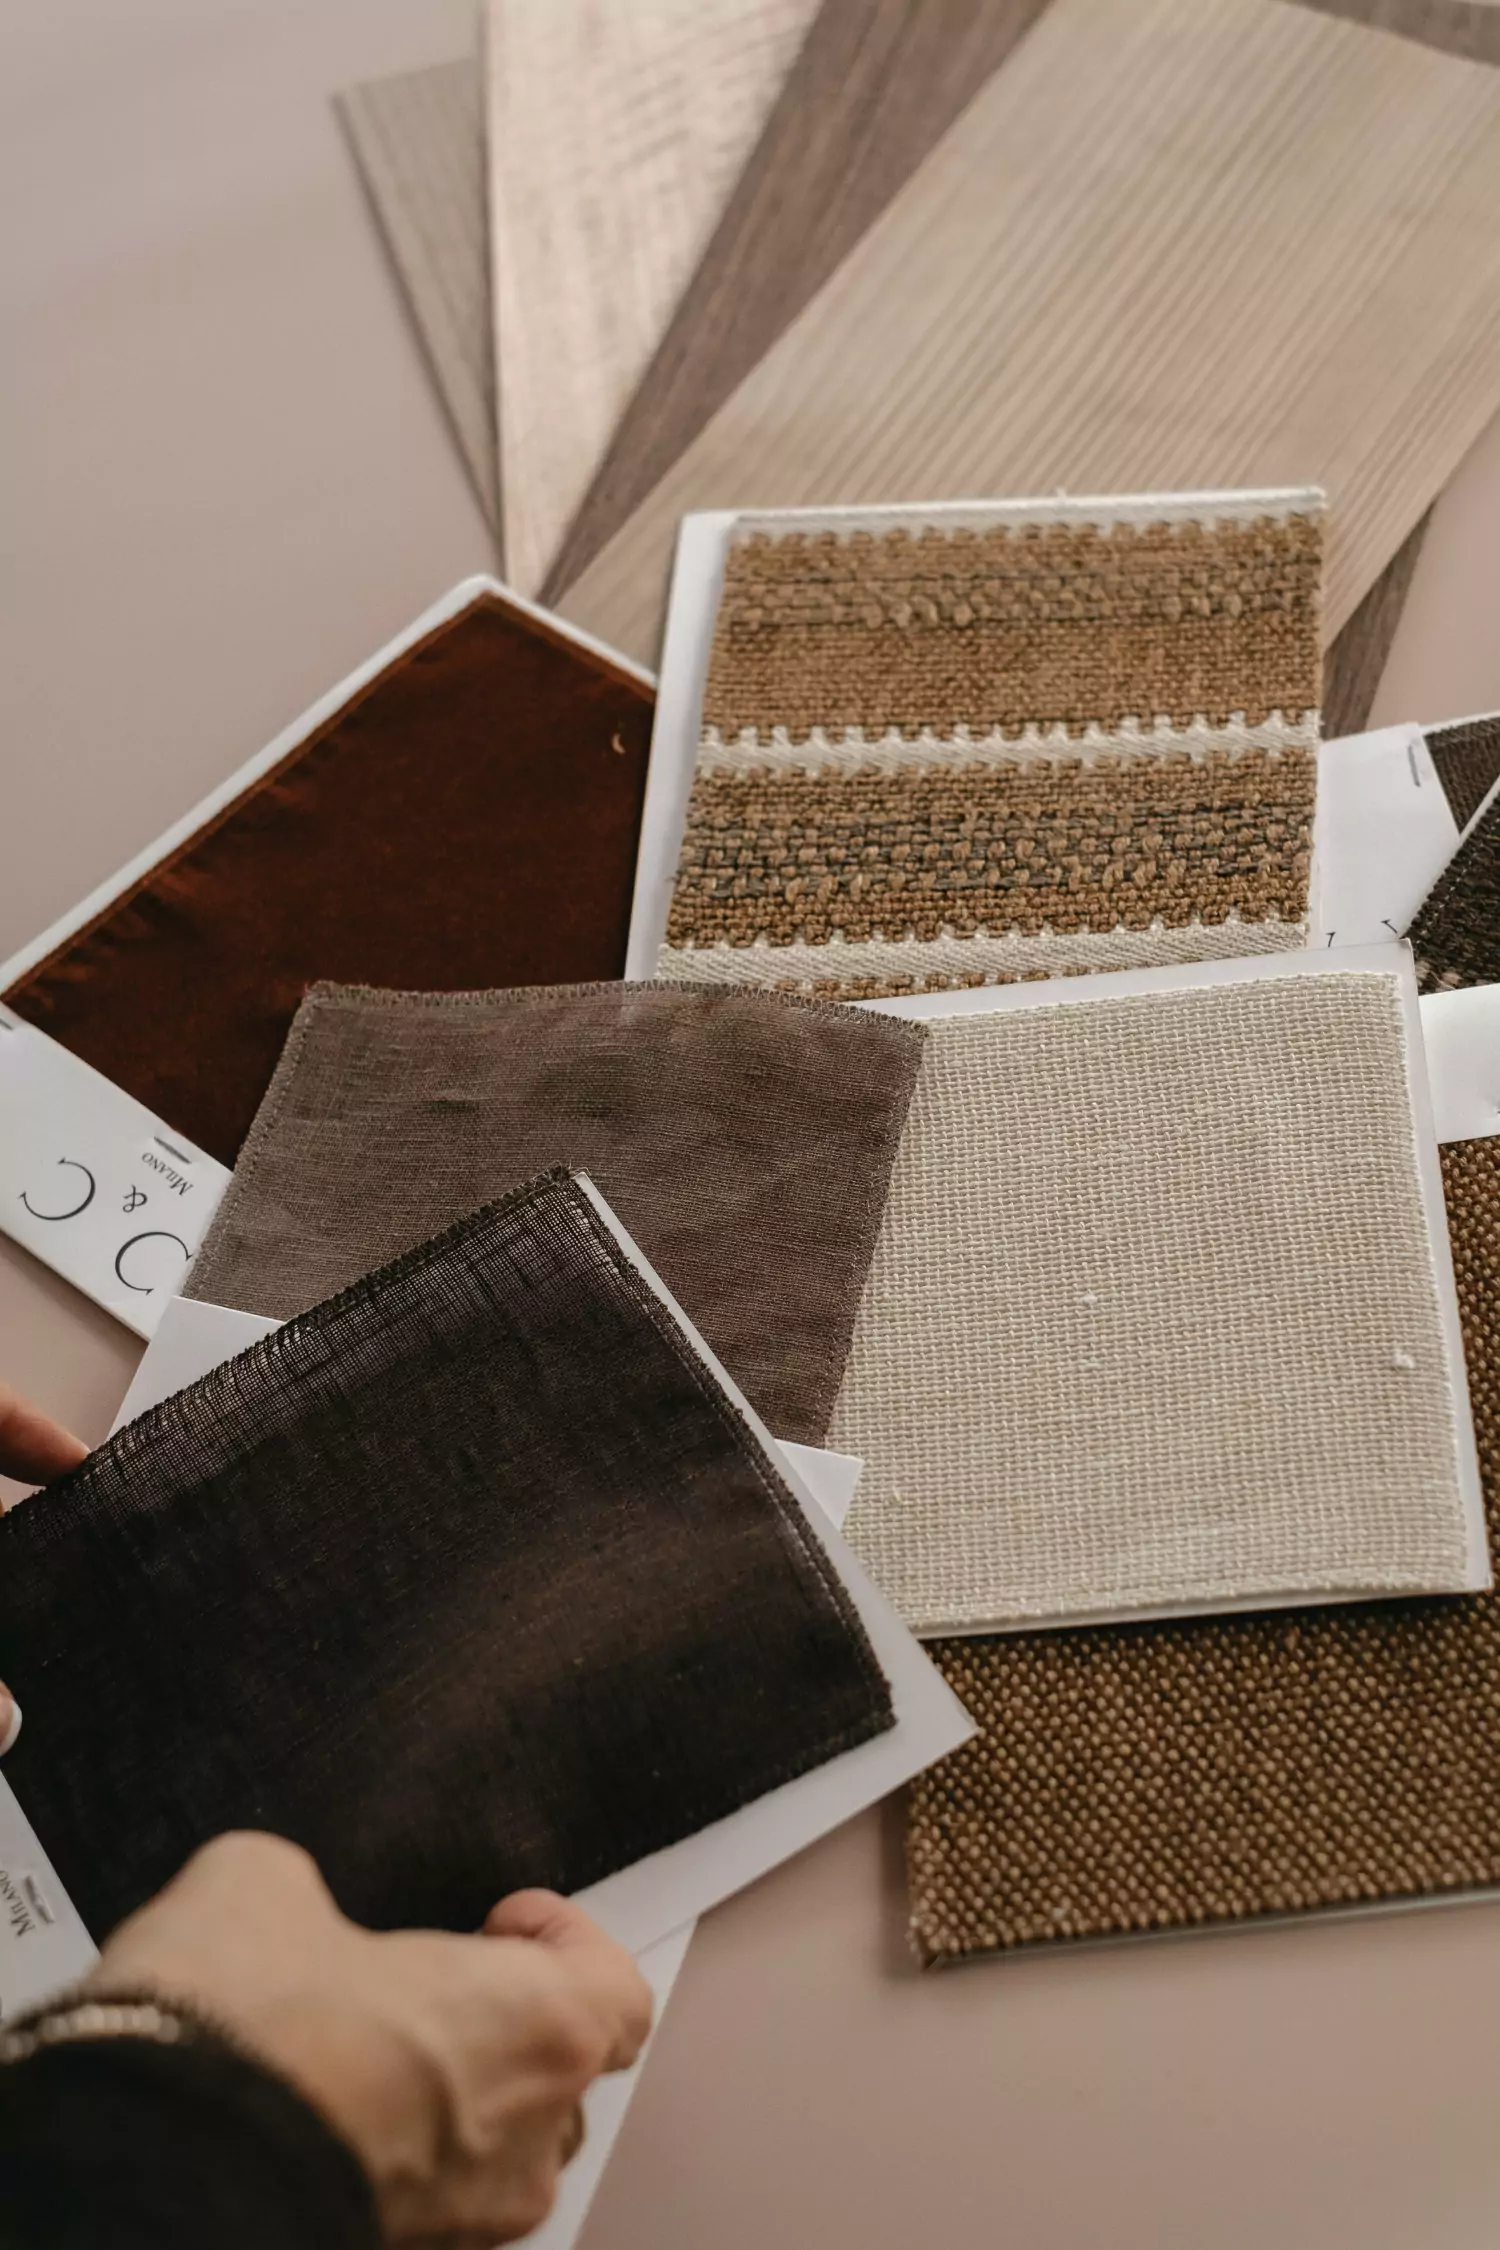 Interior designer Stefania Luraghi holds the fabrics sample selected for upholstery for a furniture project.